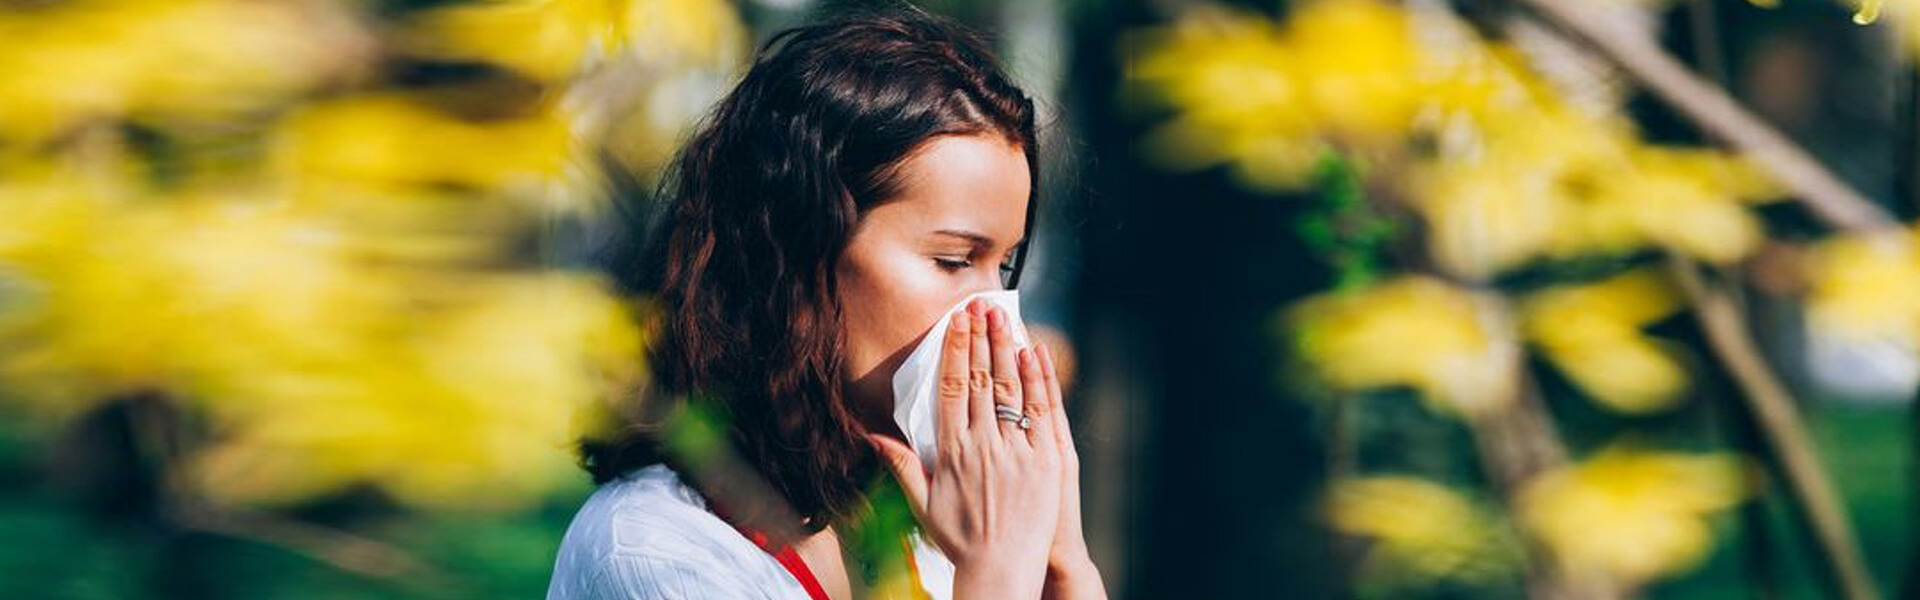 A Guide To Surviving Seasonal Allergies Naturally